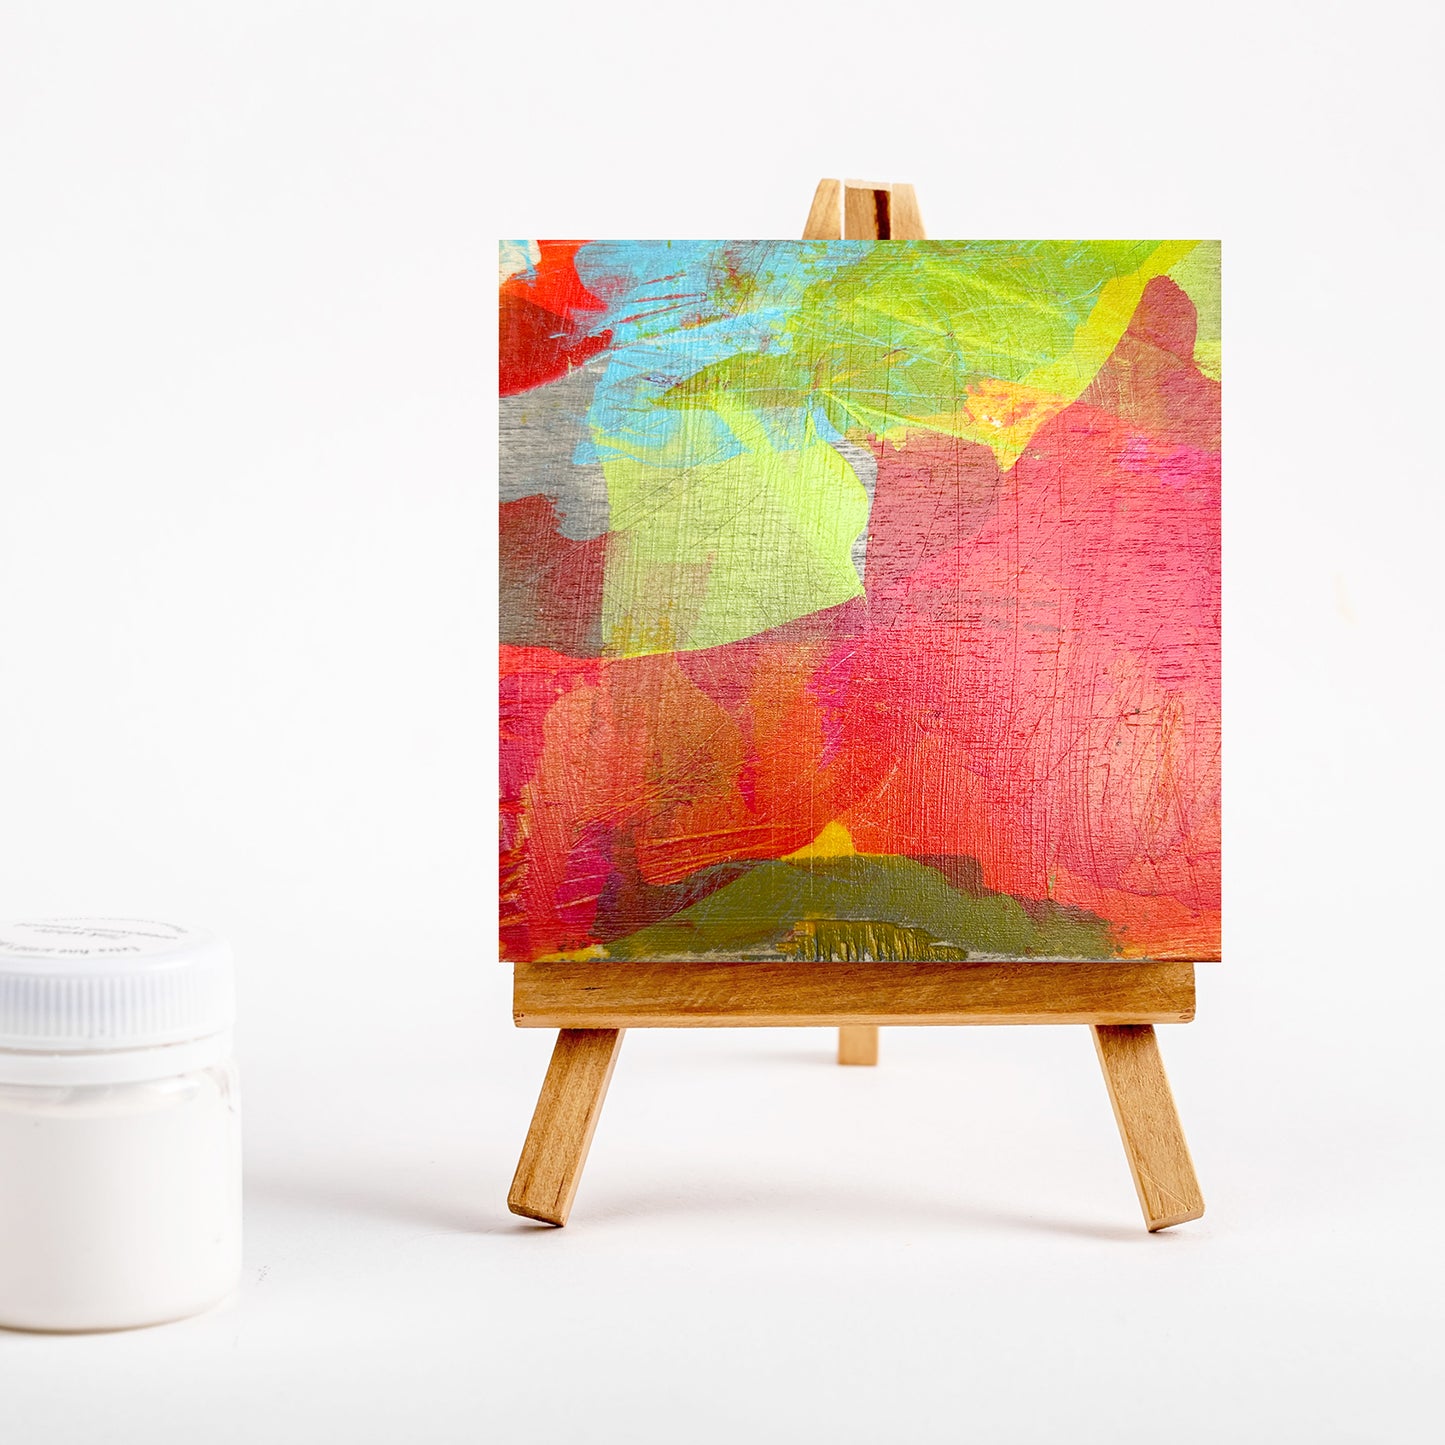 MINI "HOPE SERIES" PAINTING WITH EASEL - #307